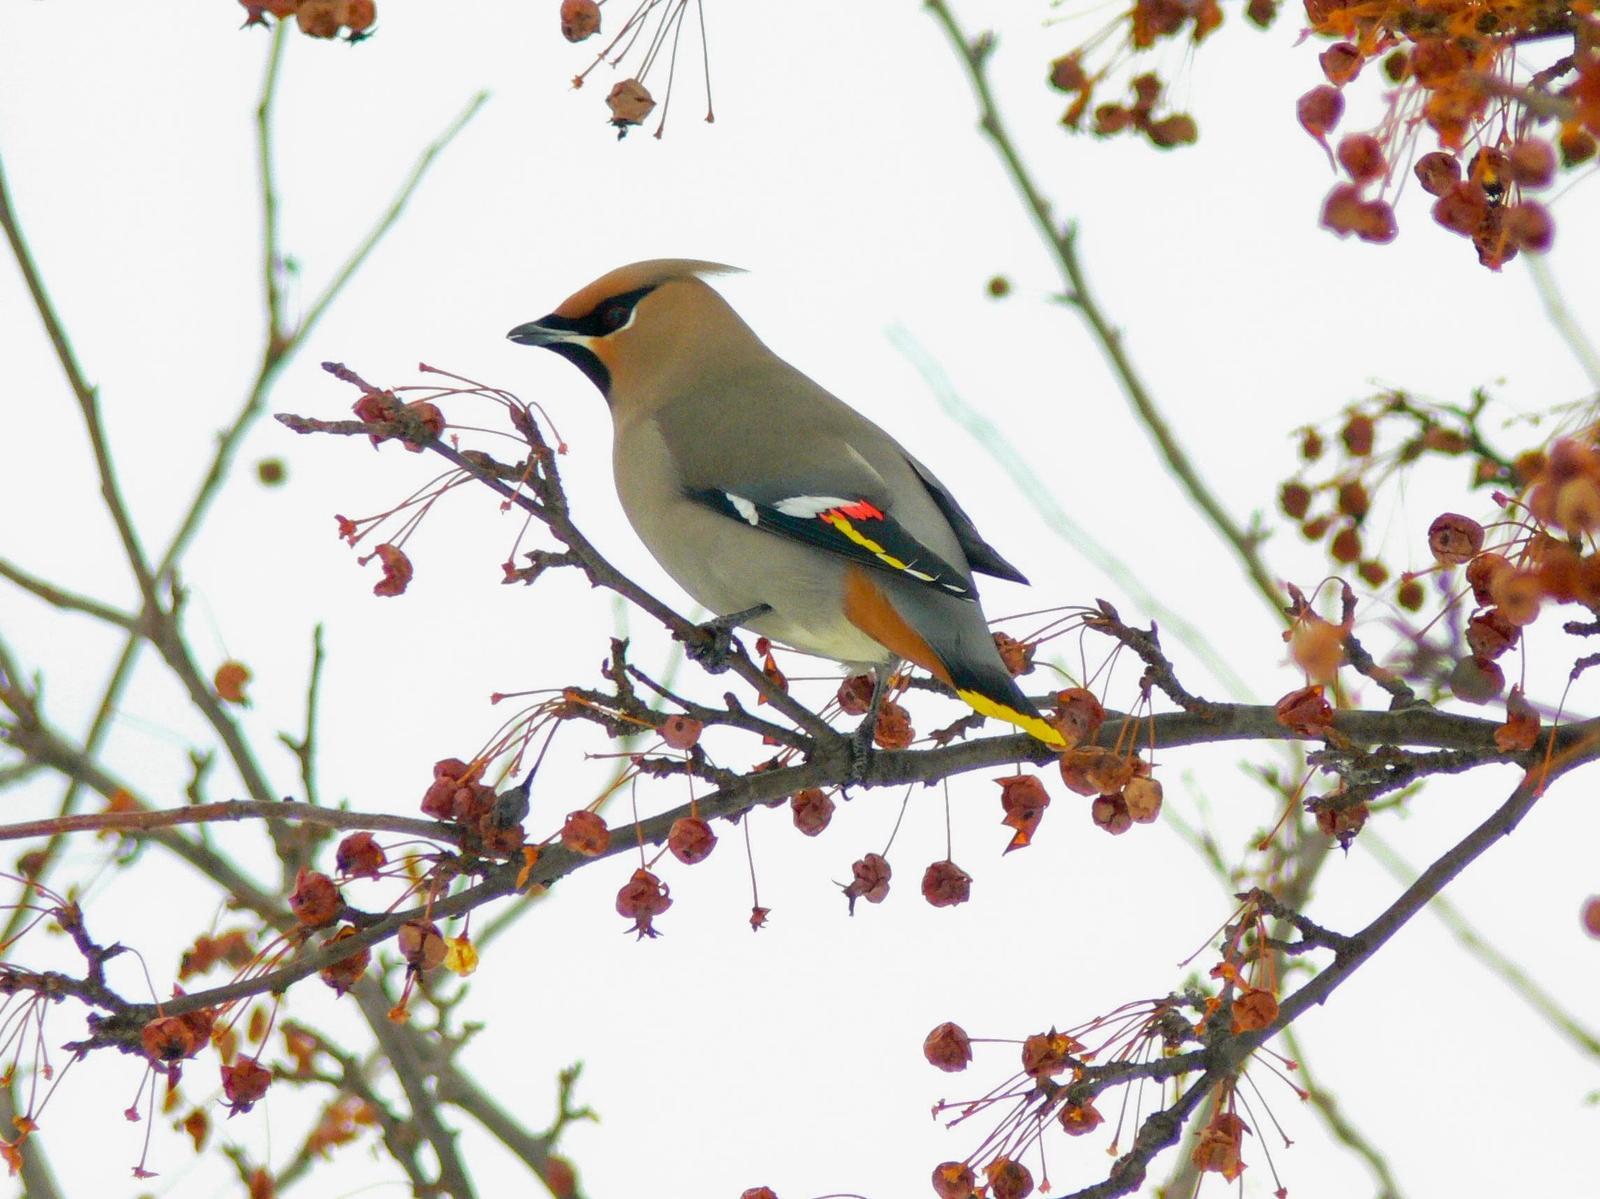 Bohemian Waxwing Photo by Tom Ford-Hutchinson